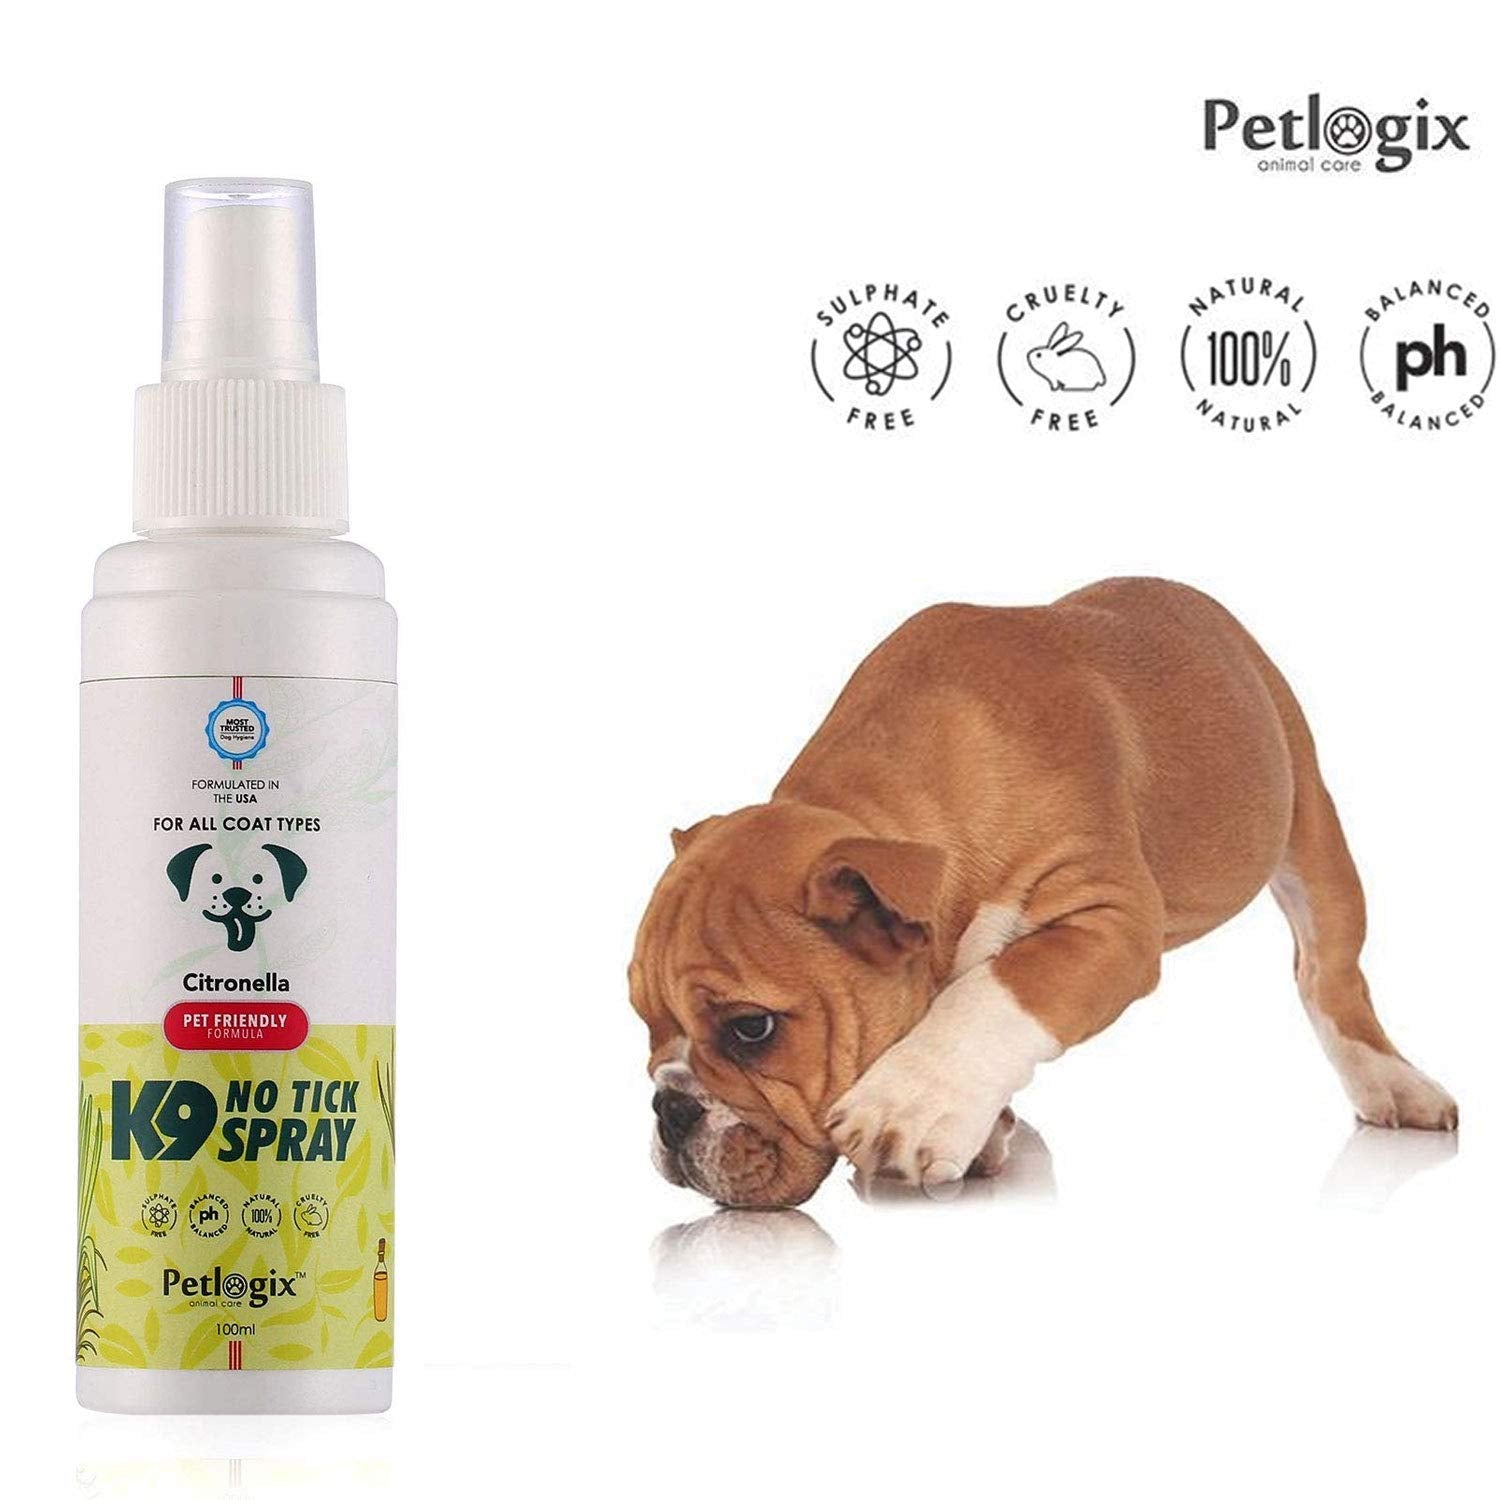 Petlogix Natural 5 in 1 Complete Pet Hygiene kit K9 Intimate Spray No Tick Spray Natural Breath Freshener Tick & Flea Wash for Dogs and Puppies